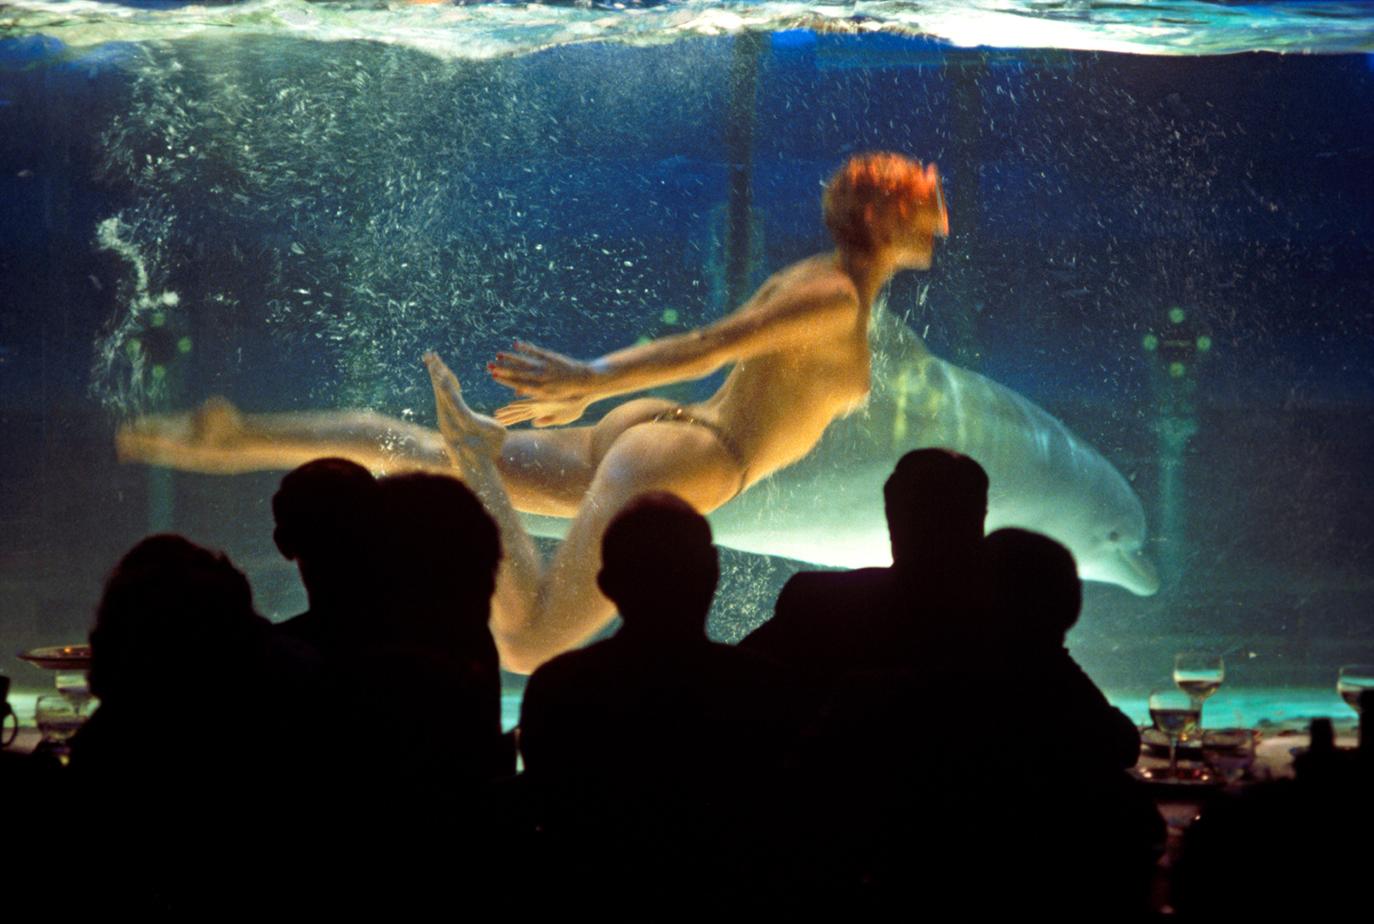 Moulin Rouge Mermaid
by Alain Le Garsmeur

A performer at the Moulin Rouge Cabaret swims underwater with a dolphin in a tank, Clichy, Paris, France, 1979.

Paper size 60 x 40 inches / 152 x 101 cm
Printed in 2024 
Archival Pigment Print 
Signed and